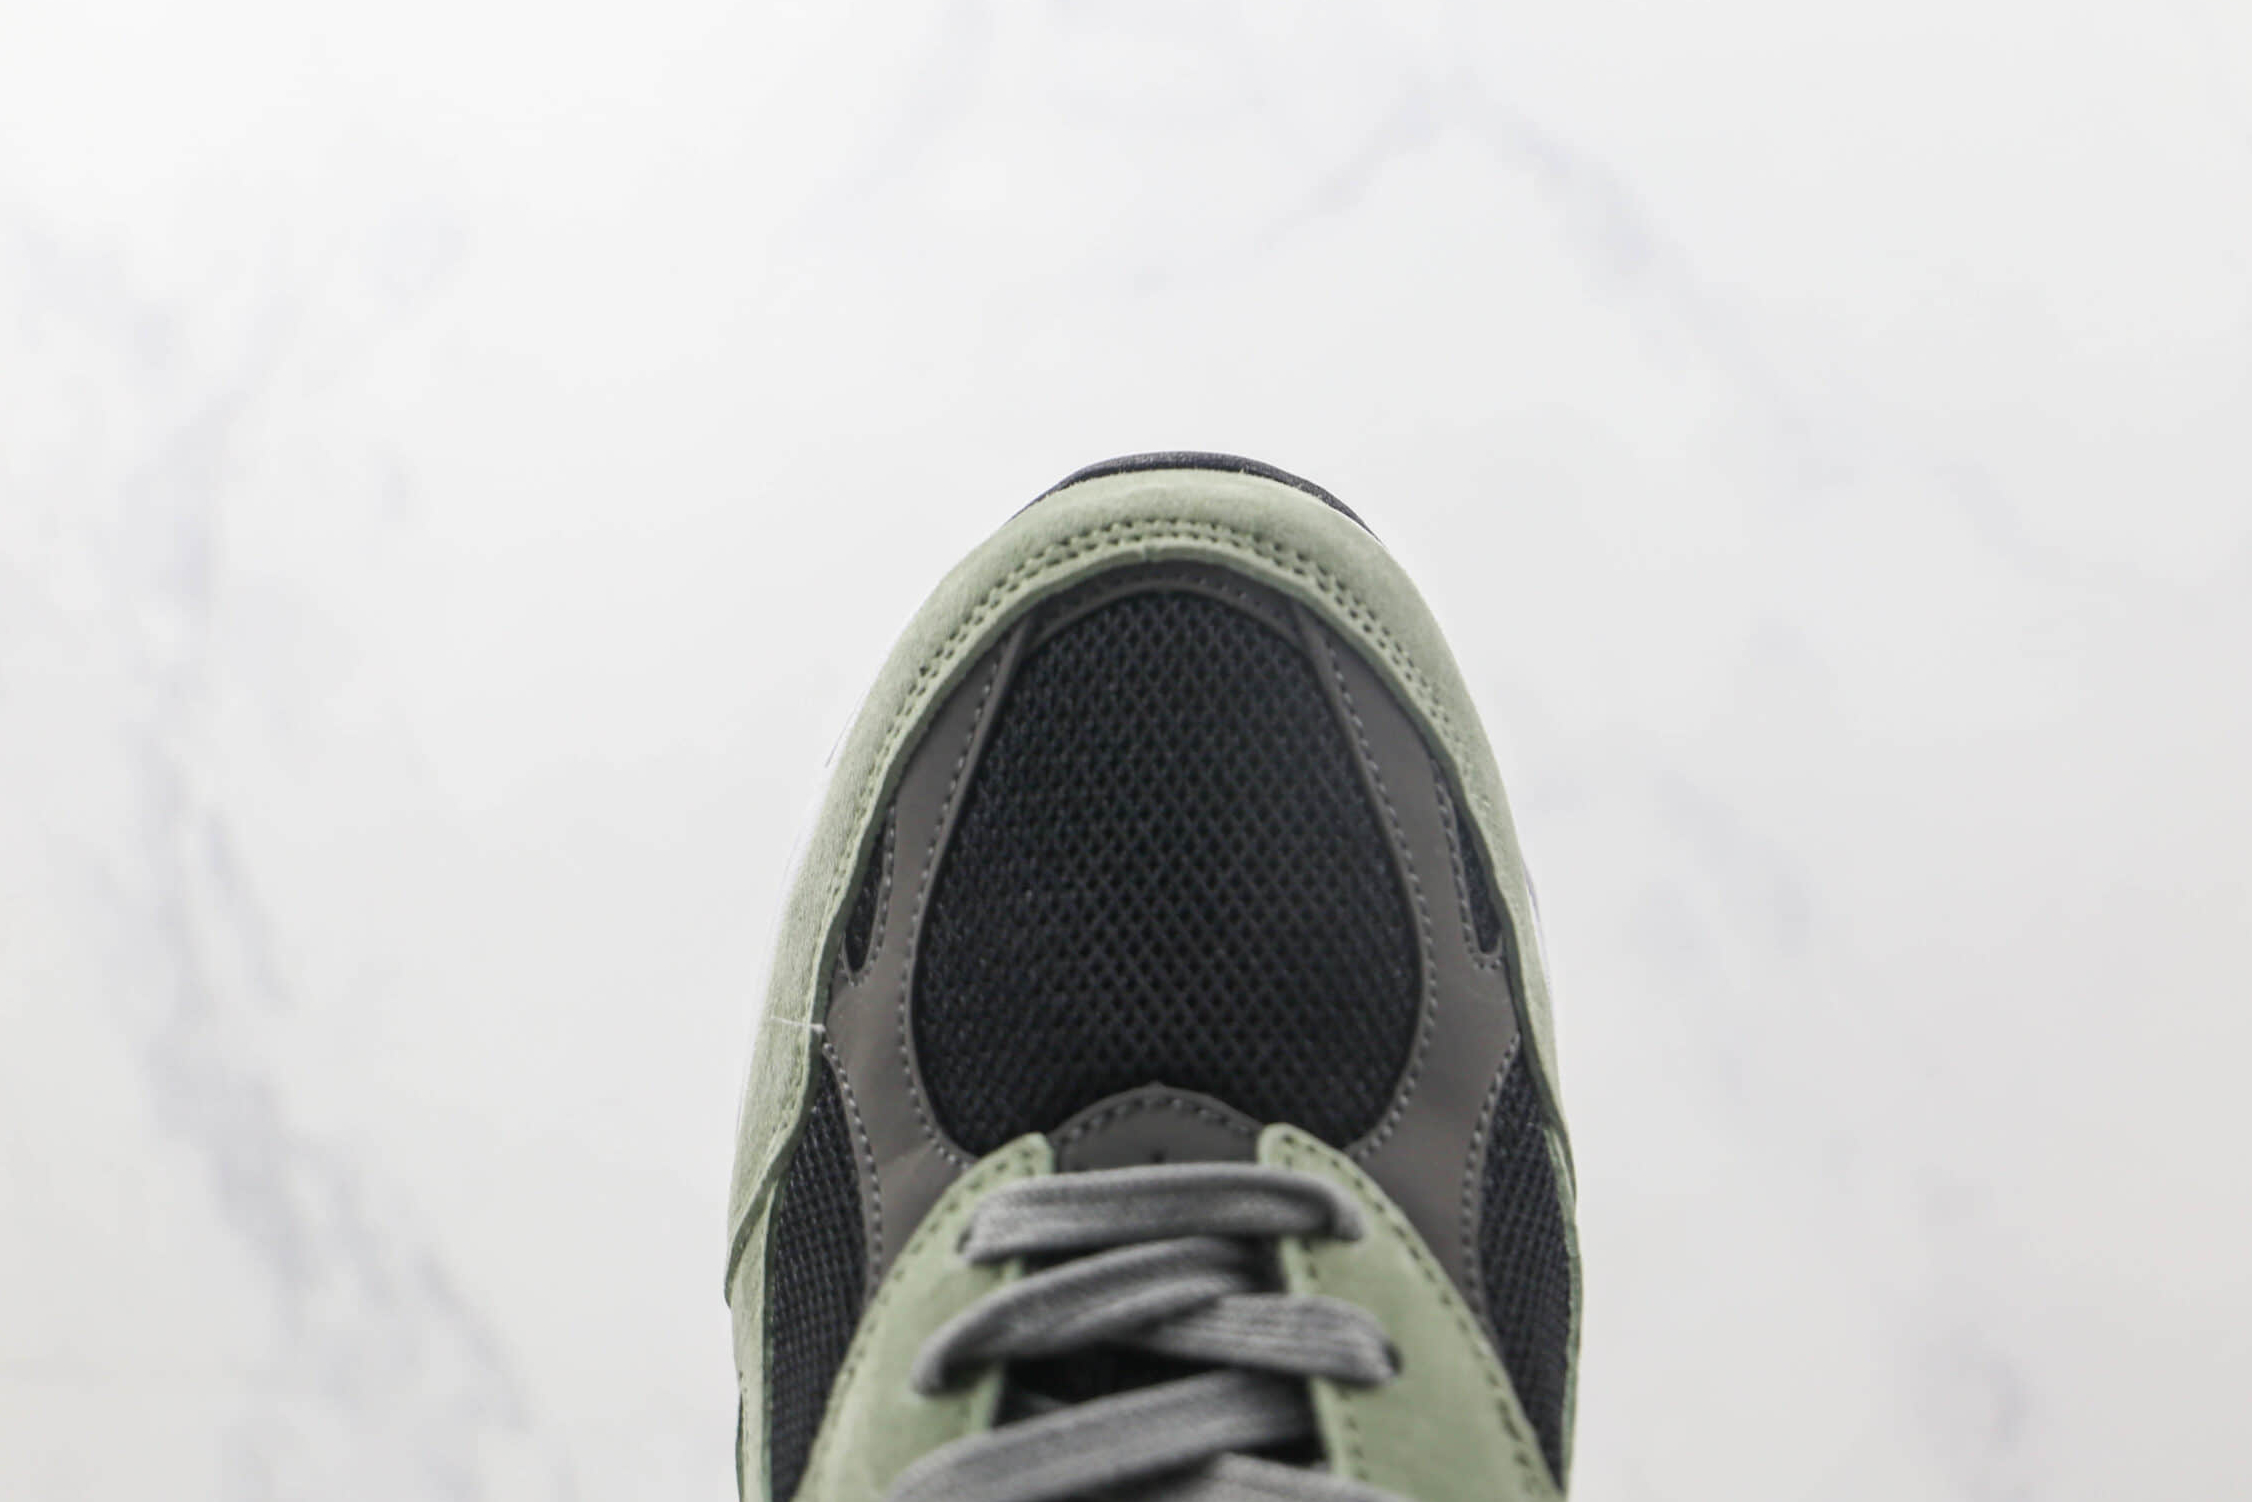 New Balance Teddy Santis x 990v3 'Olive Leaf' M990TC3 − Limited Edition Collaboration - Exciting New Release!